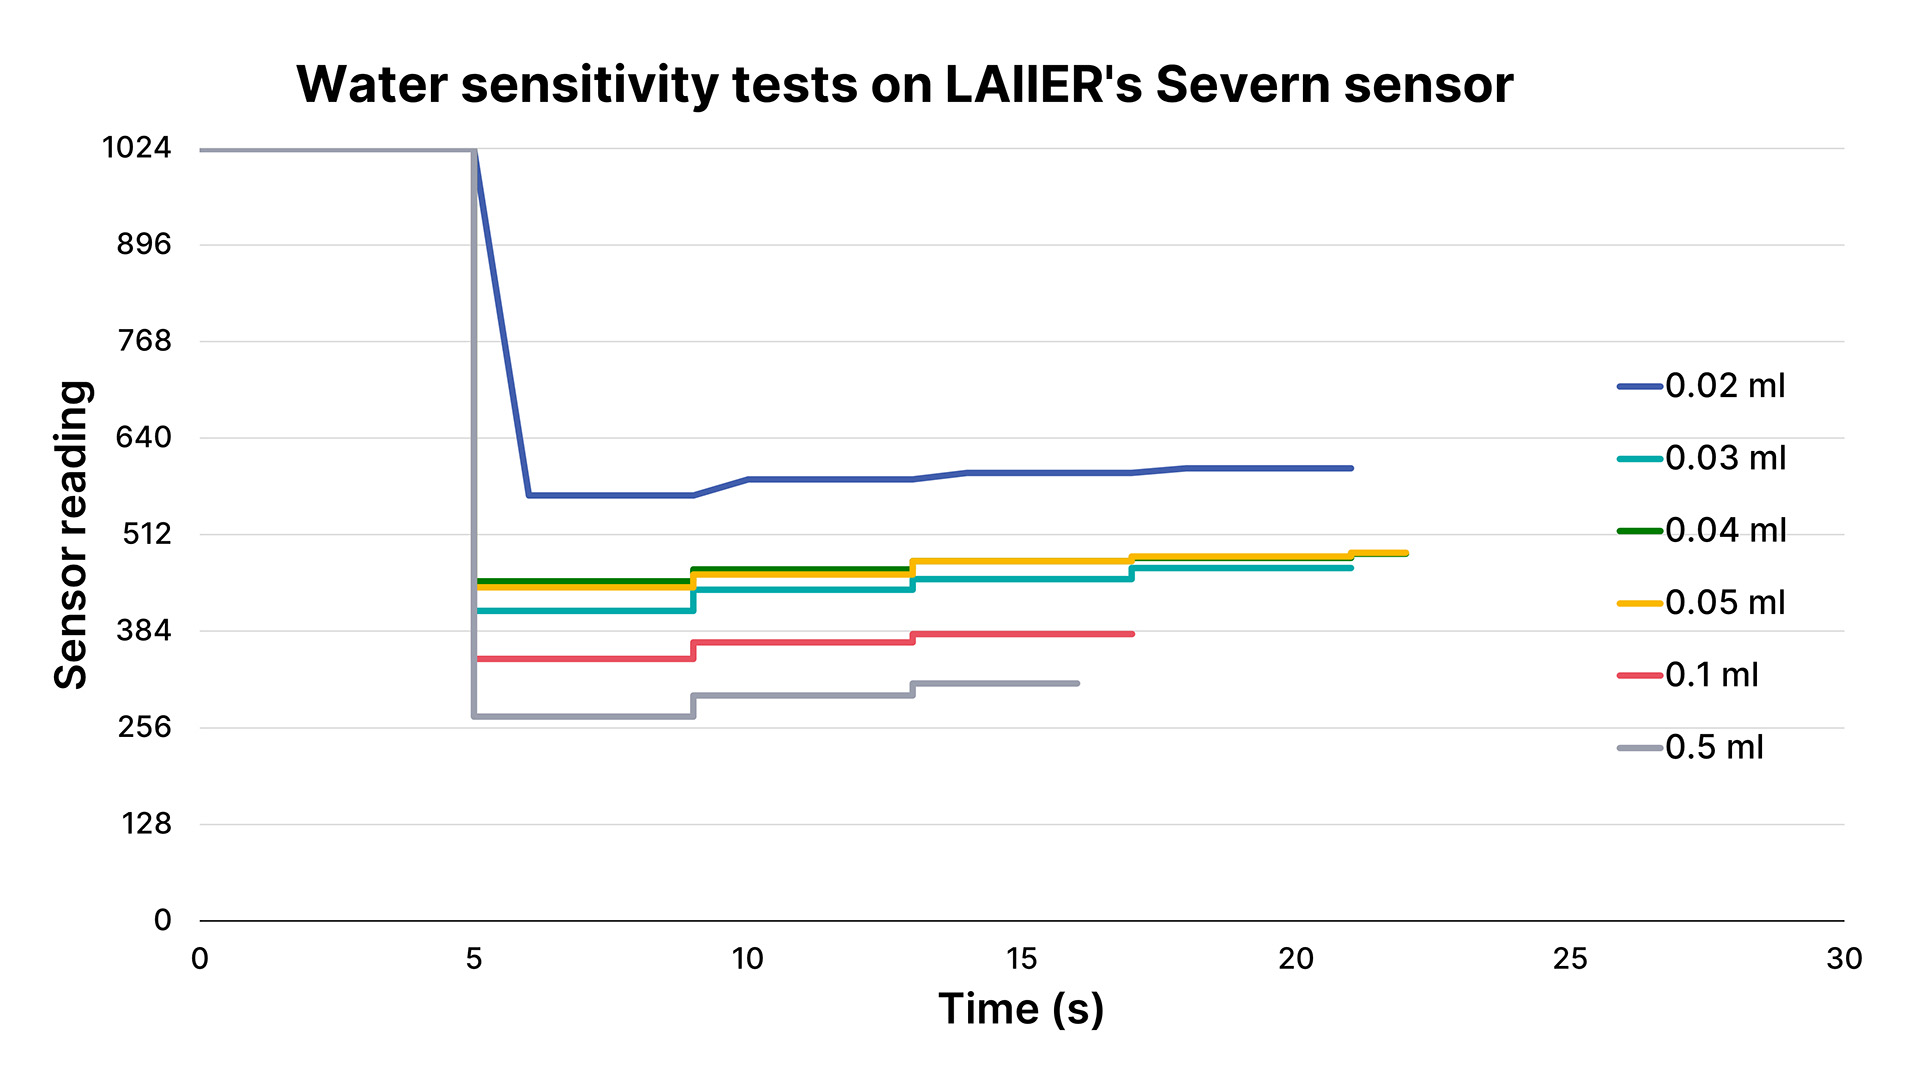 Graph showing the water sensitivity of the Severn sensor